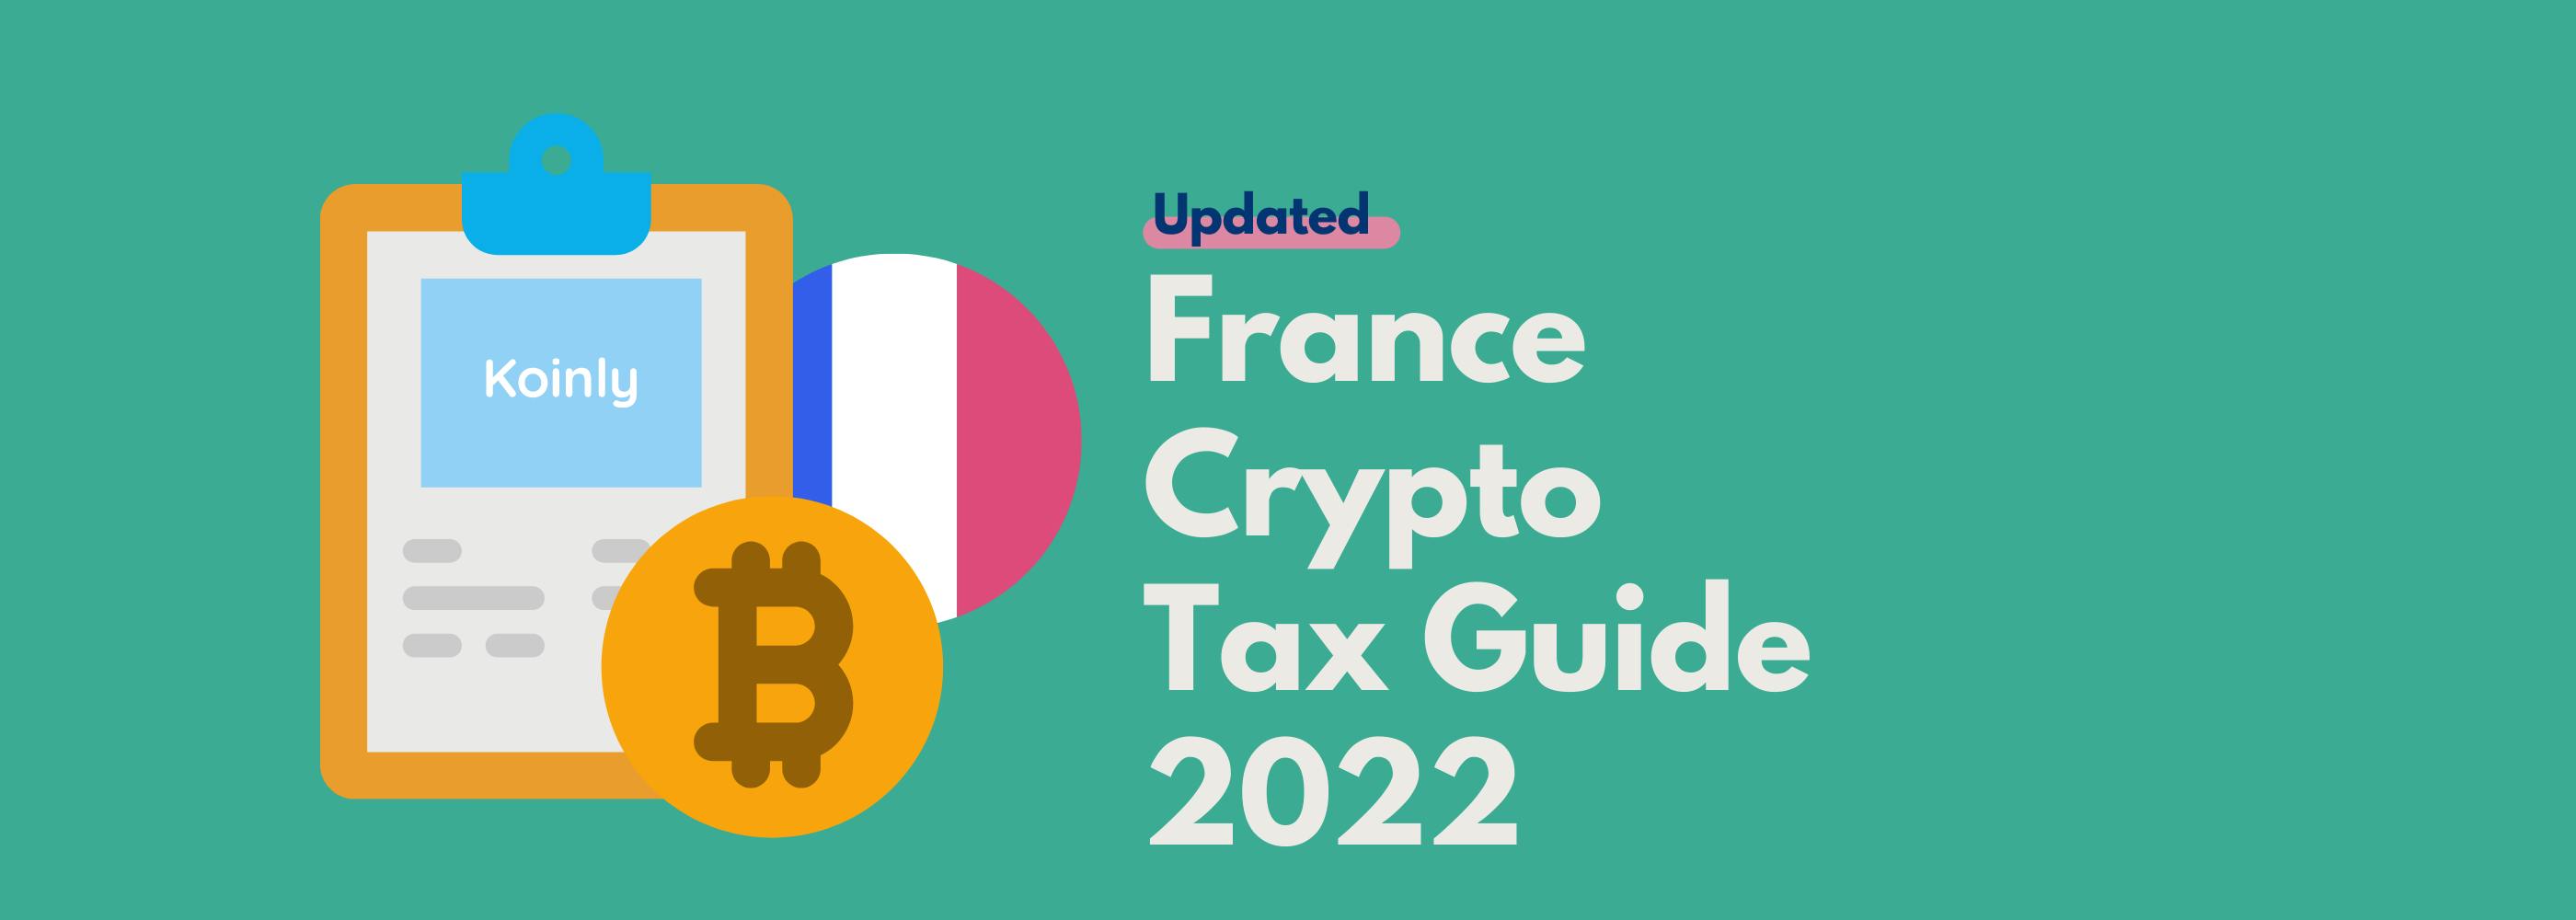 Koinly Crypto Tax guide for France